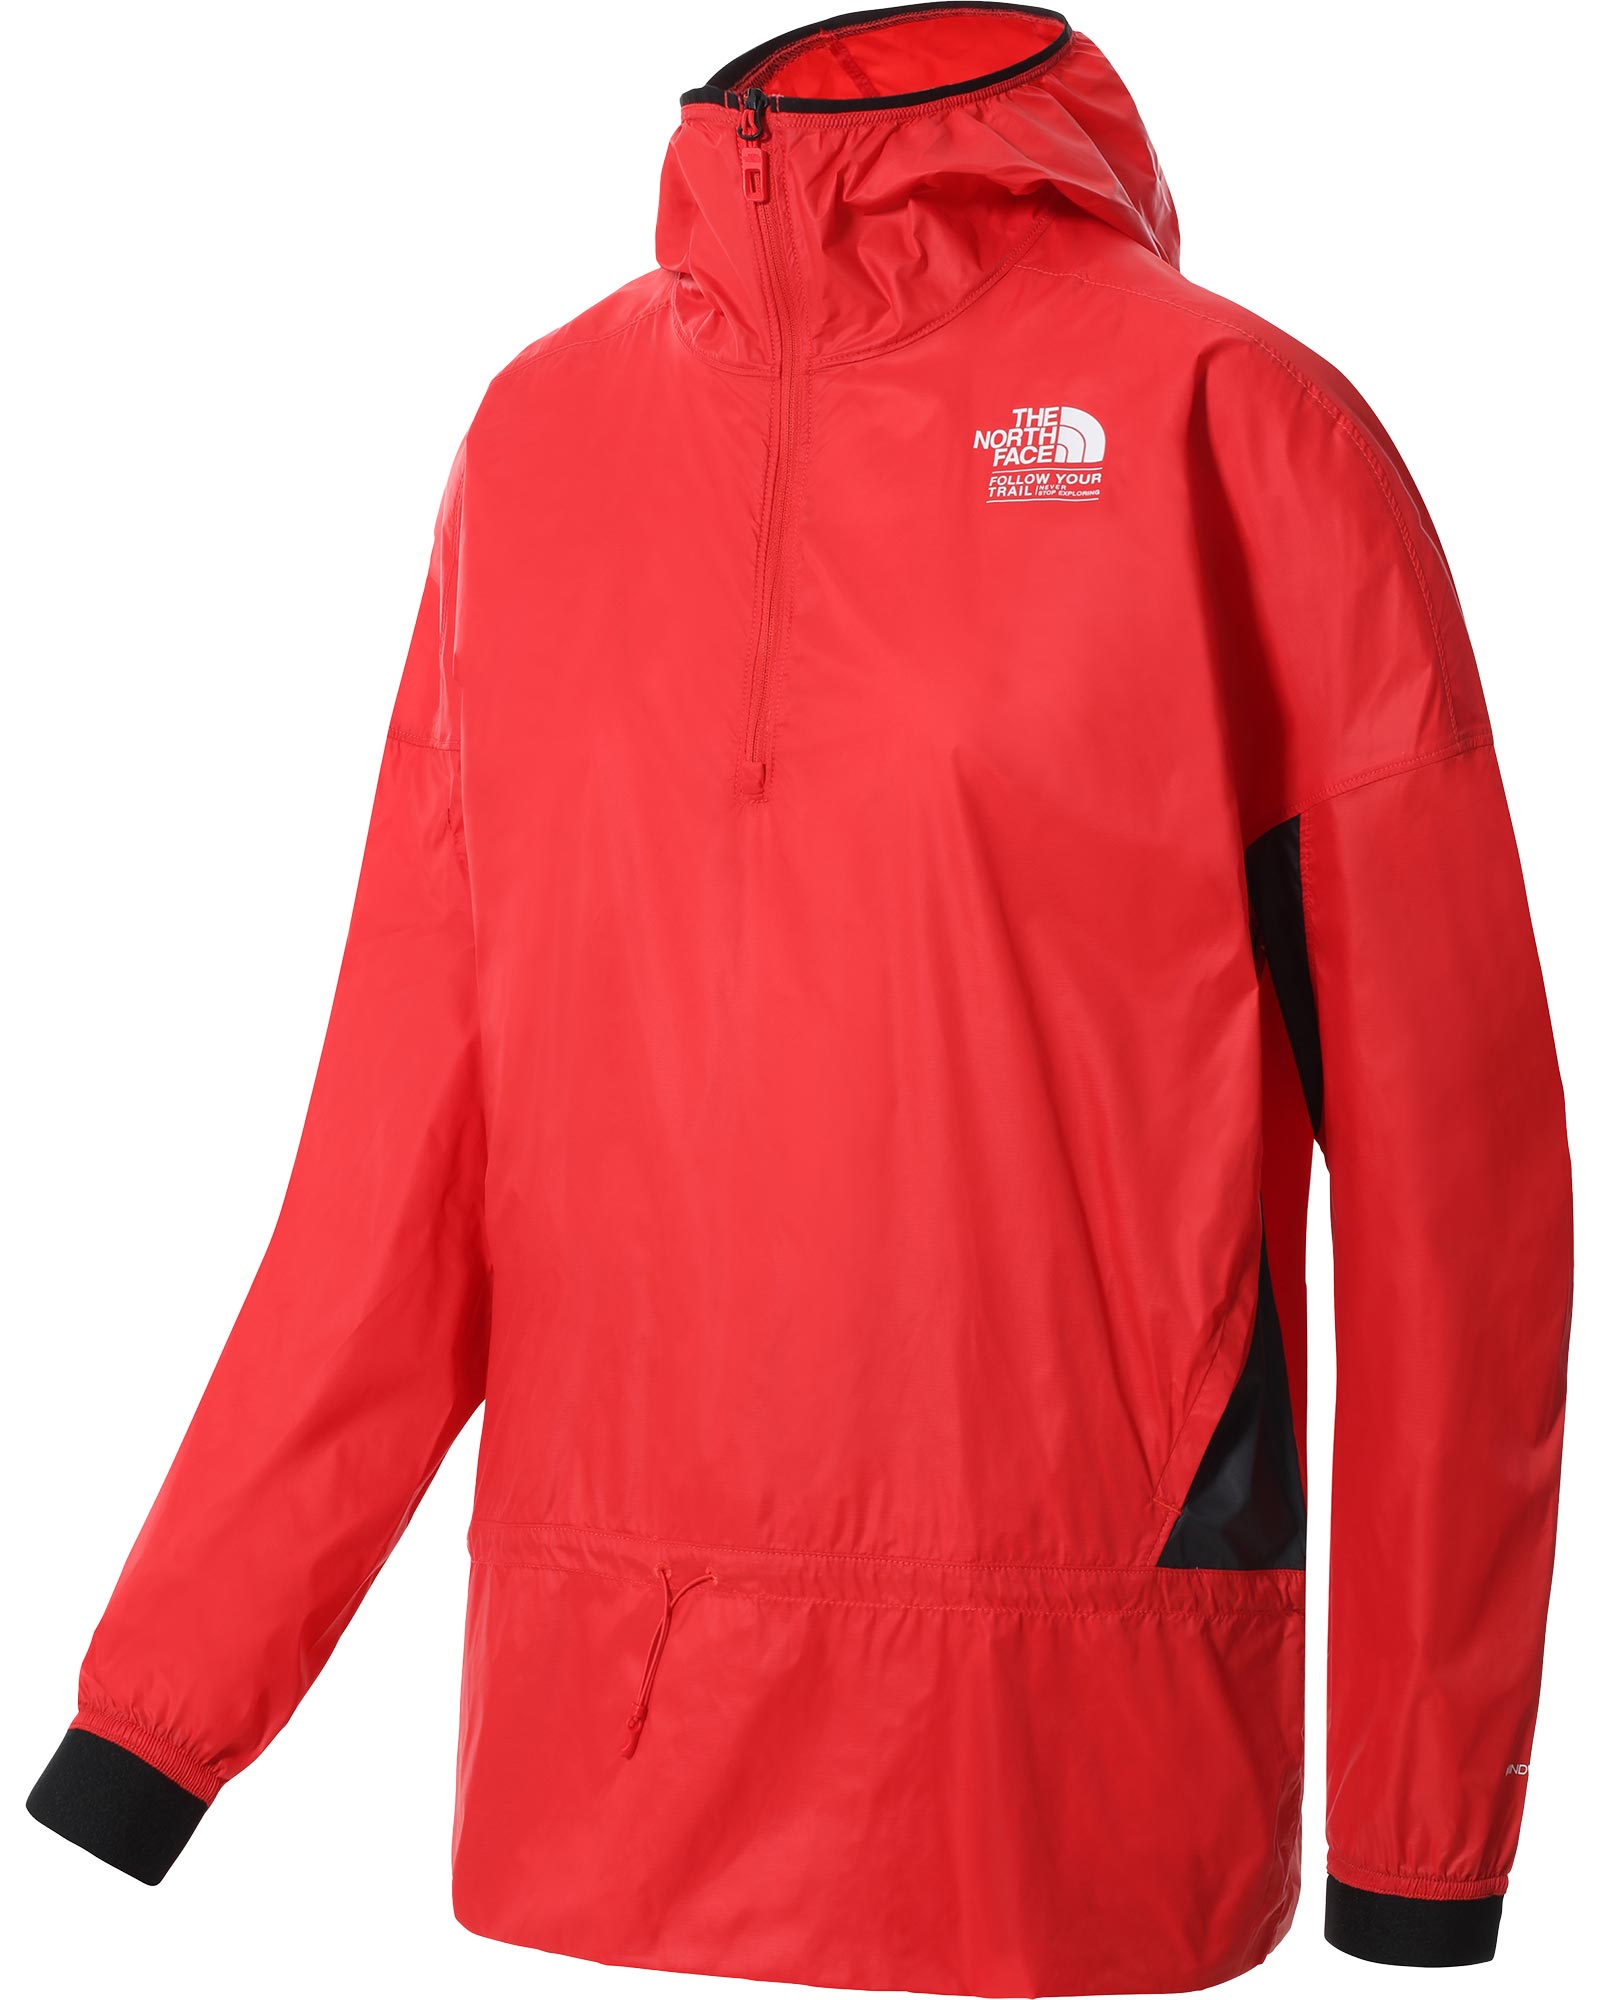 The North Face AO Women’s Wind Jacket - Horizon Red XS